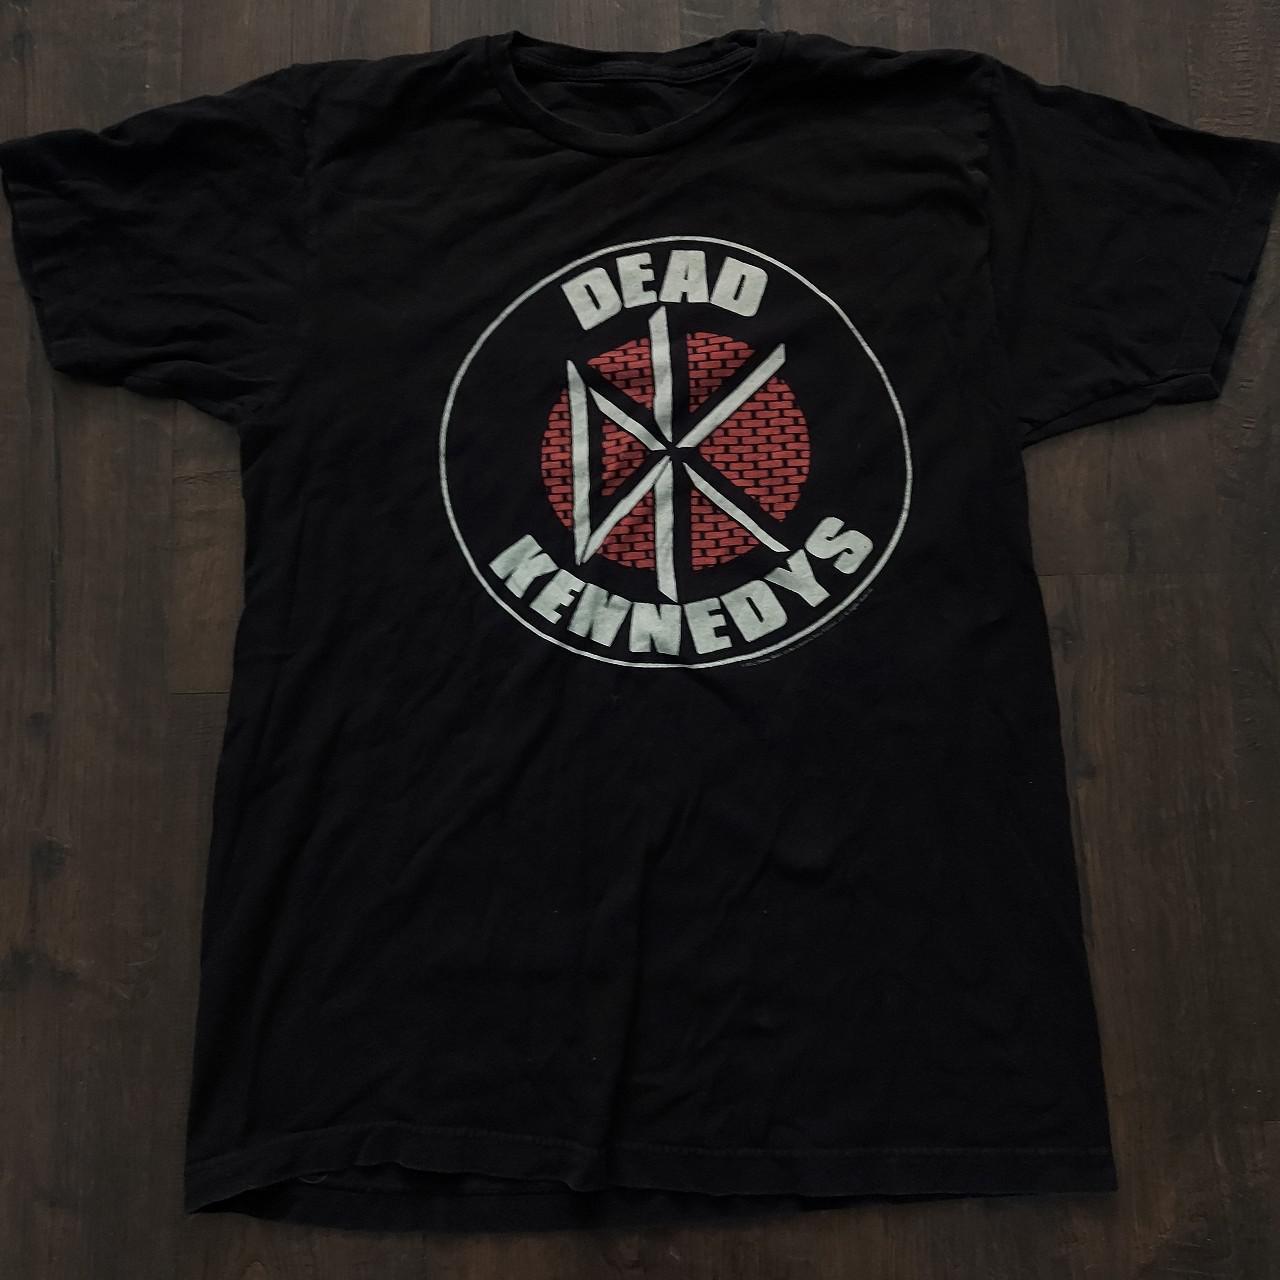 Product Image 1 - Dead Kennedys t shirt
2012 punk